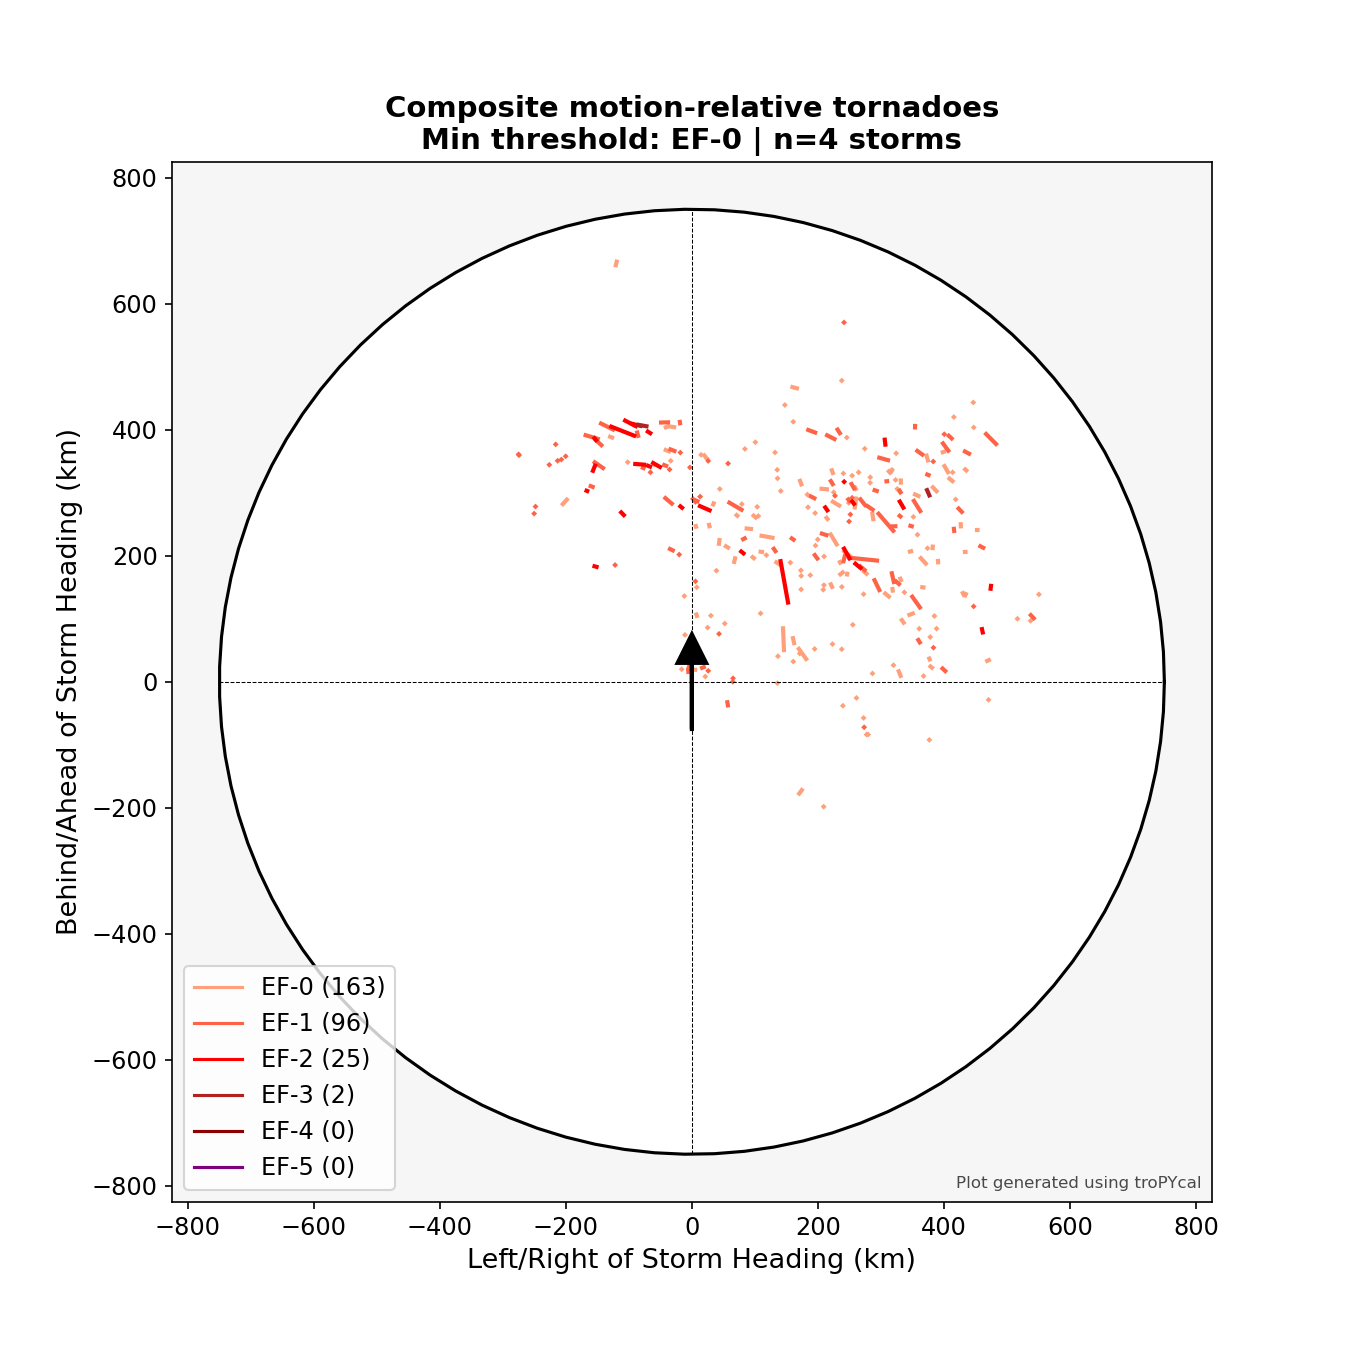 Composite motion-relative tornadoes Min threshold: EF-0 | n=4 storms